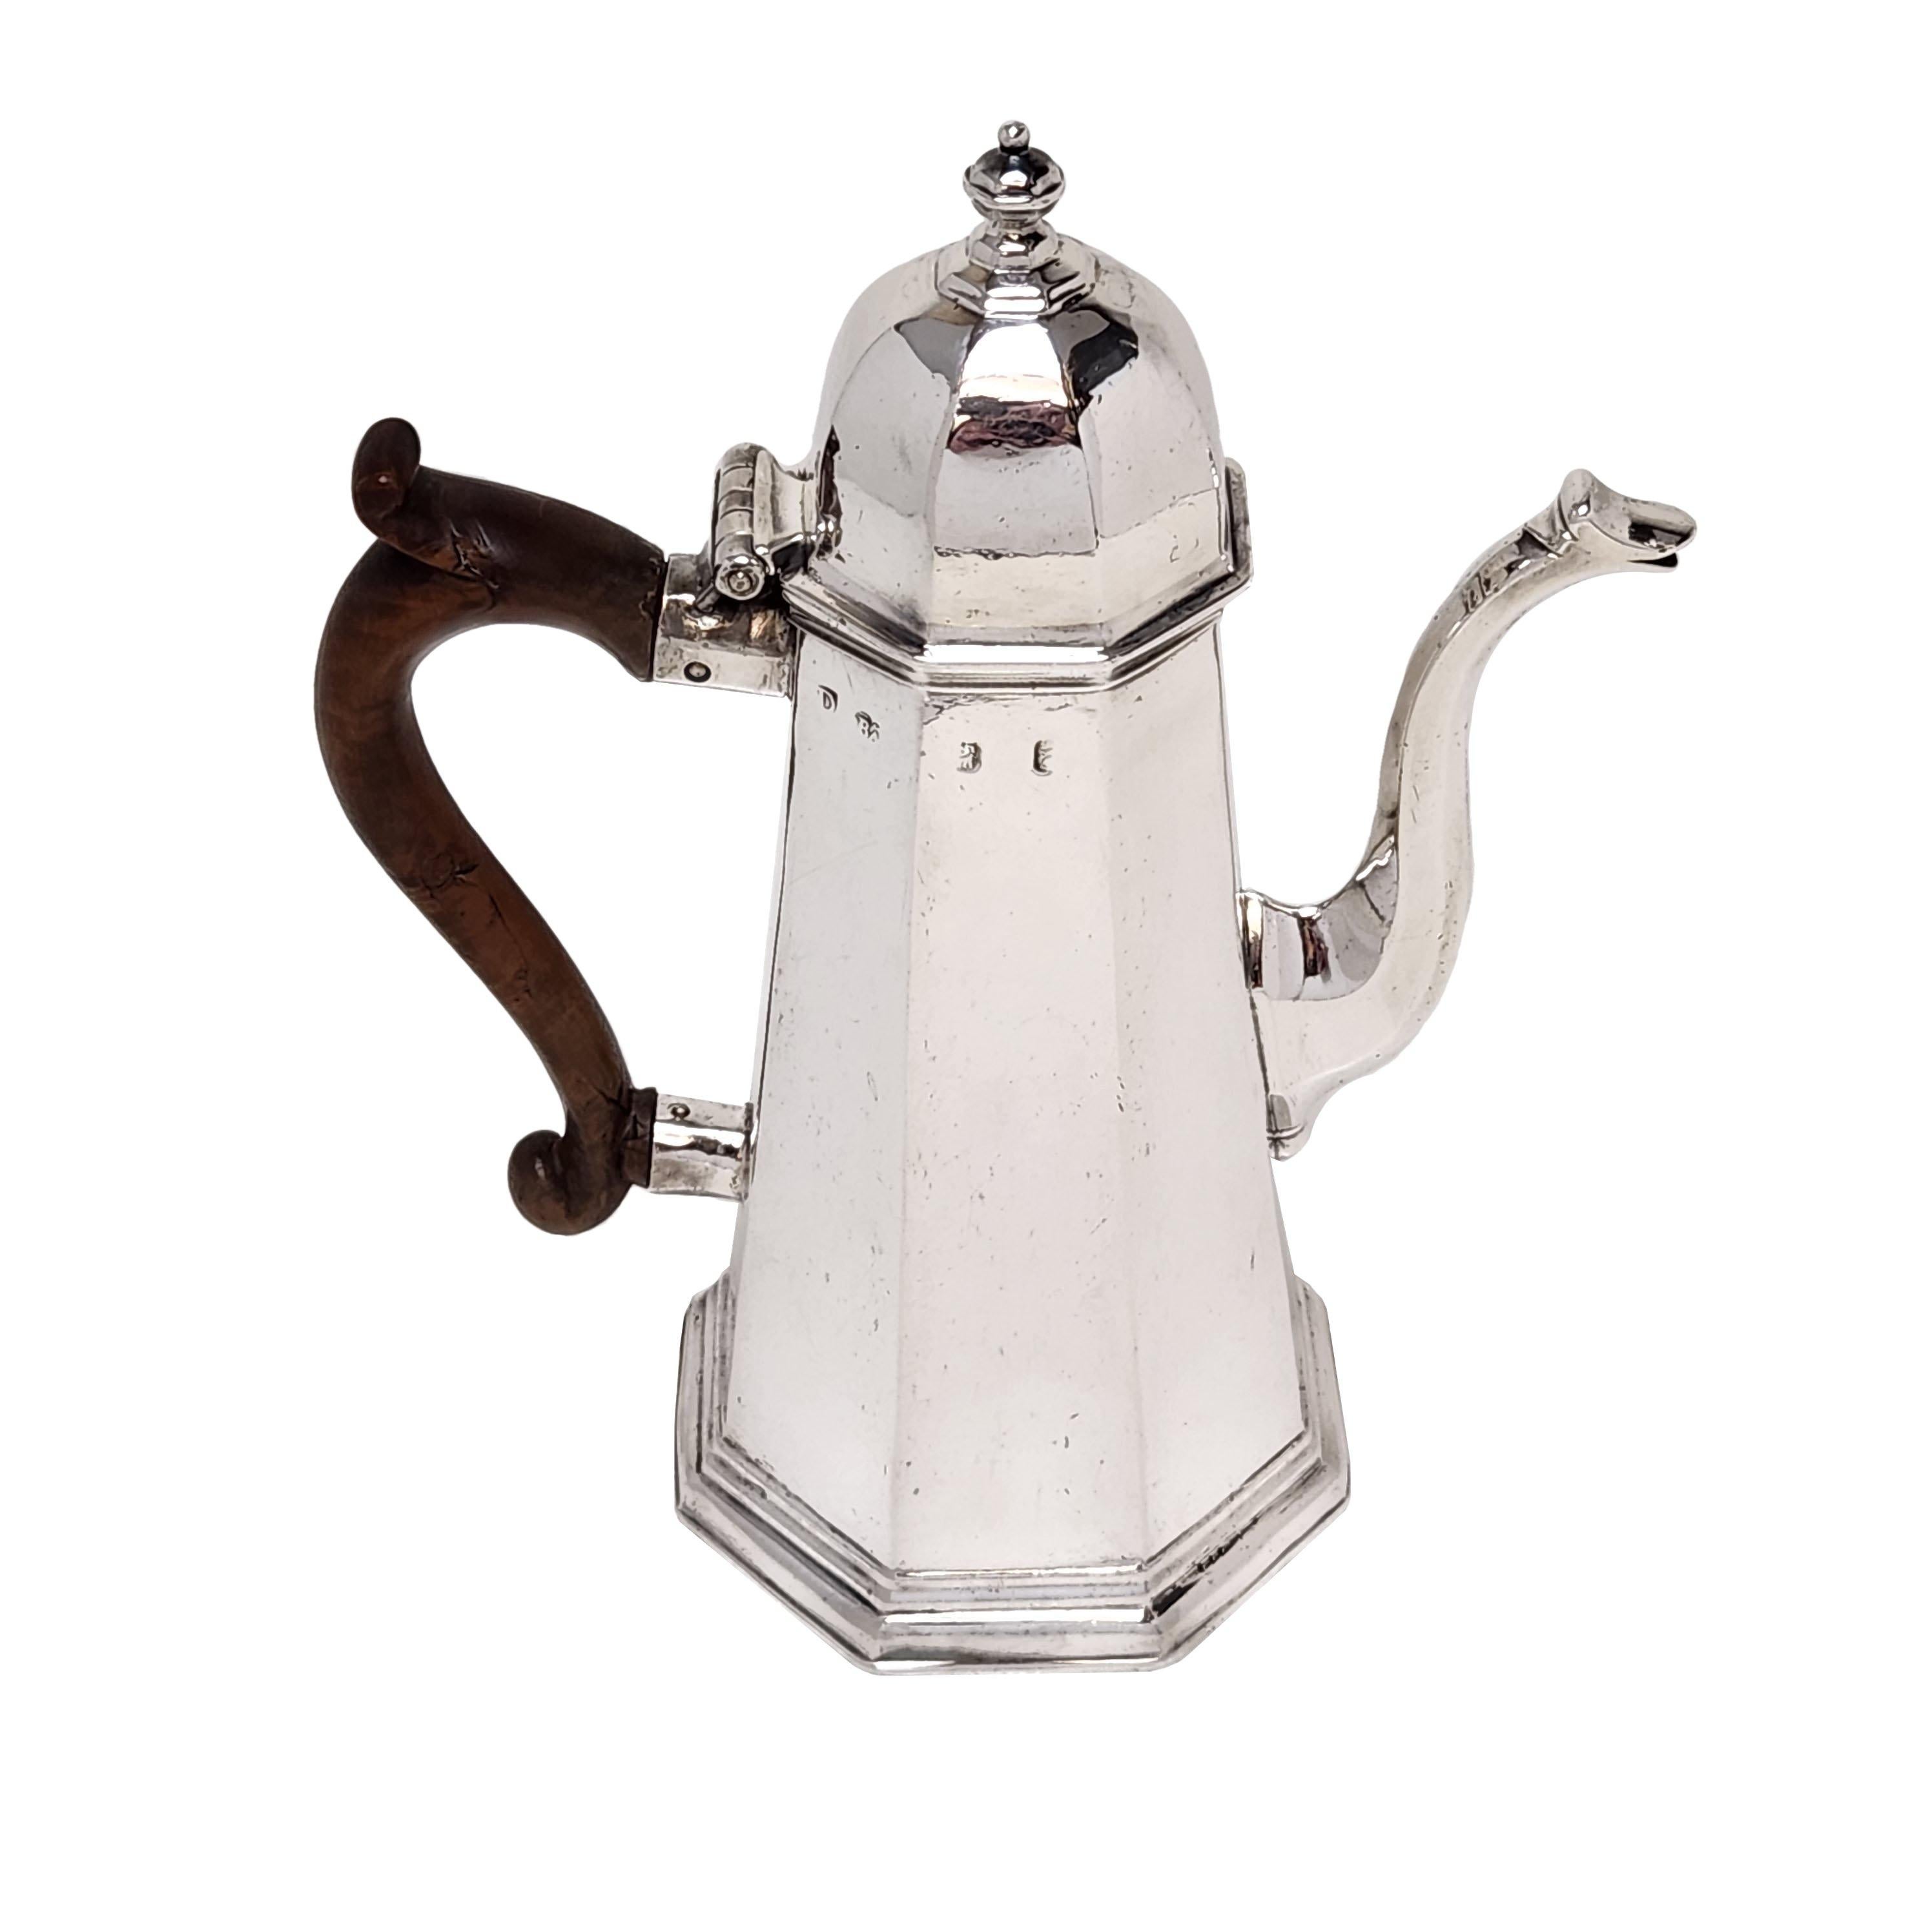 An elegant Antique George I Solid Silver Coffee Pot in a traditional Tapered Octagonal shape width an Octagonal Domed Lid. The early Georgian Coffee Pot has a wooden handle.

Made in London, England in 1719 by Richard Bayley.

Approx. Weight - 643g